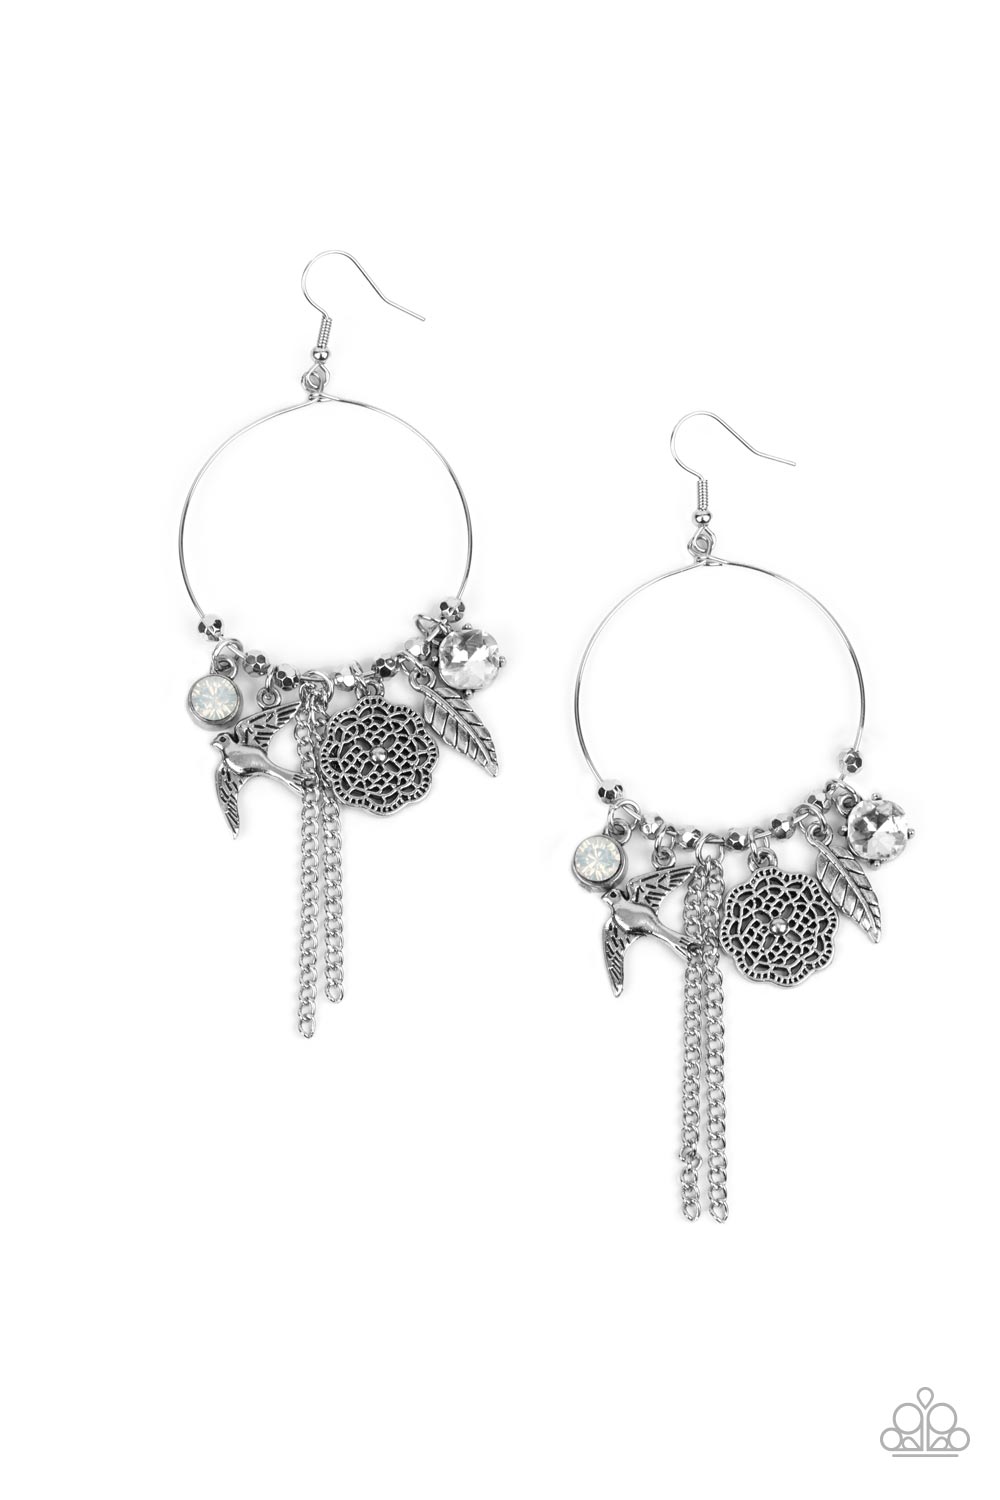 Tweet Dreams - Silver Earrings free-spirited charms, including opal and white gems, a floral medallion, a bird in flight, and a fluttering feather, dangle from a dainty silver ring coalescing into a charming lure. Earring attaches to a standard fishhook fitting.  Sold as one pair of earrings.  Paparazzi Jewelry is lead and nickel free so it's perfect for sensitive skin too!